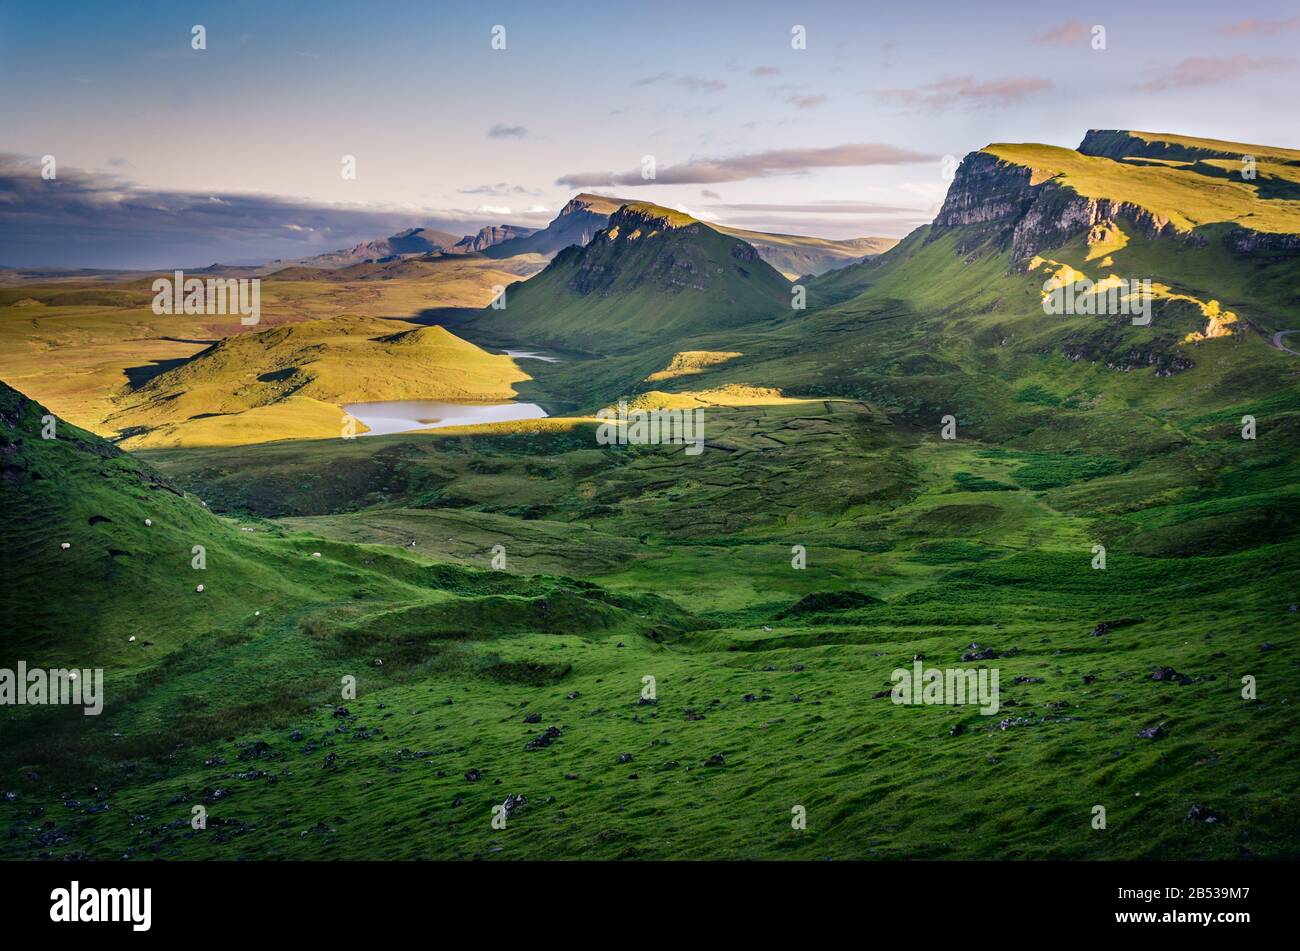 Quiraing hiking trail with sheep of meadows during sunset, Isle of Skye, Scotland Stock Photo